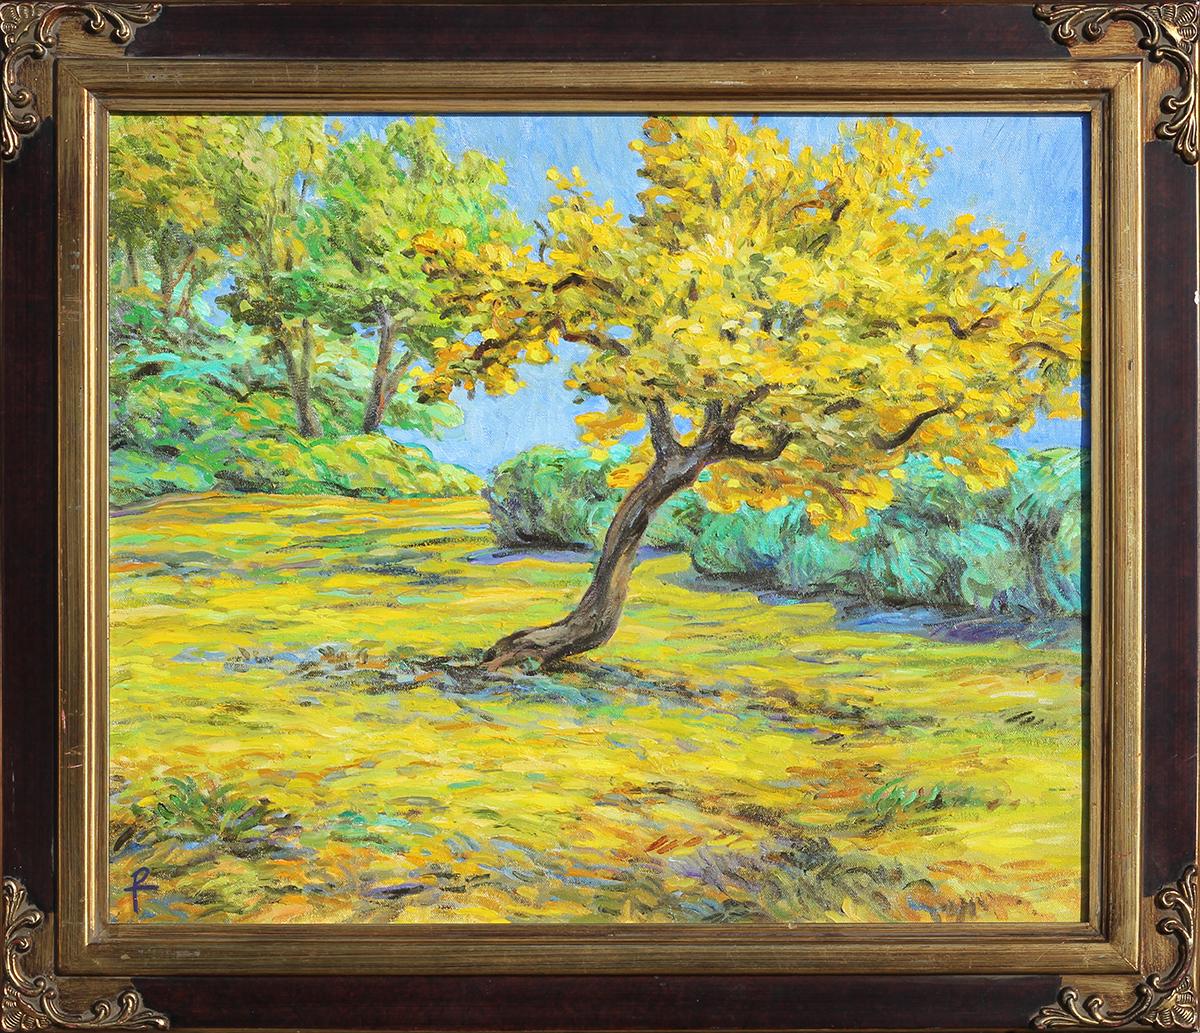 Henry David Potwin Landscape Painting - "Yellow Tree" Modern Post-Impressionist Yellow & Blue Abstract Forest Landscape